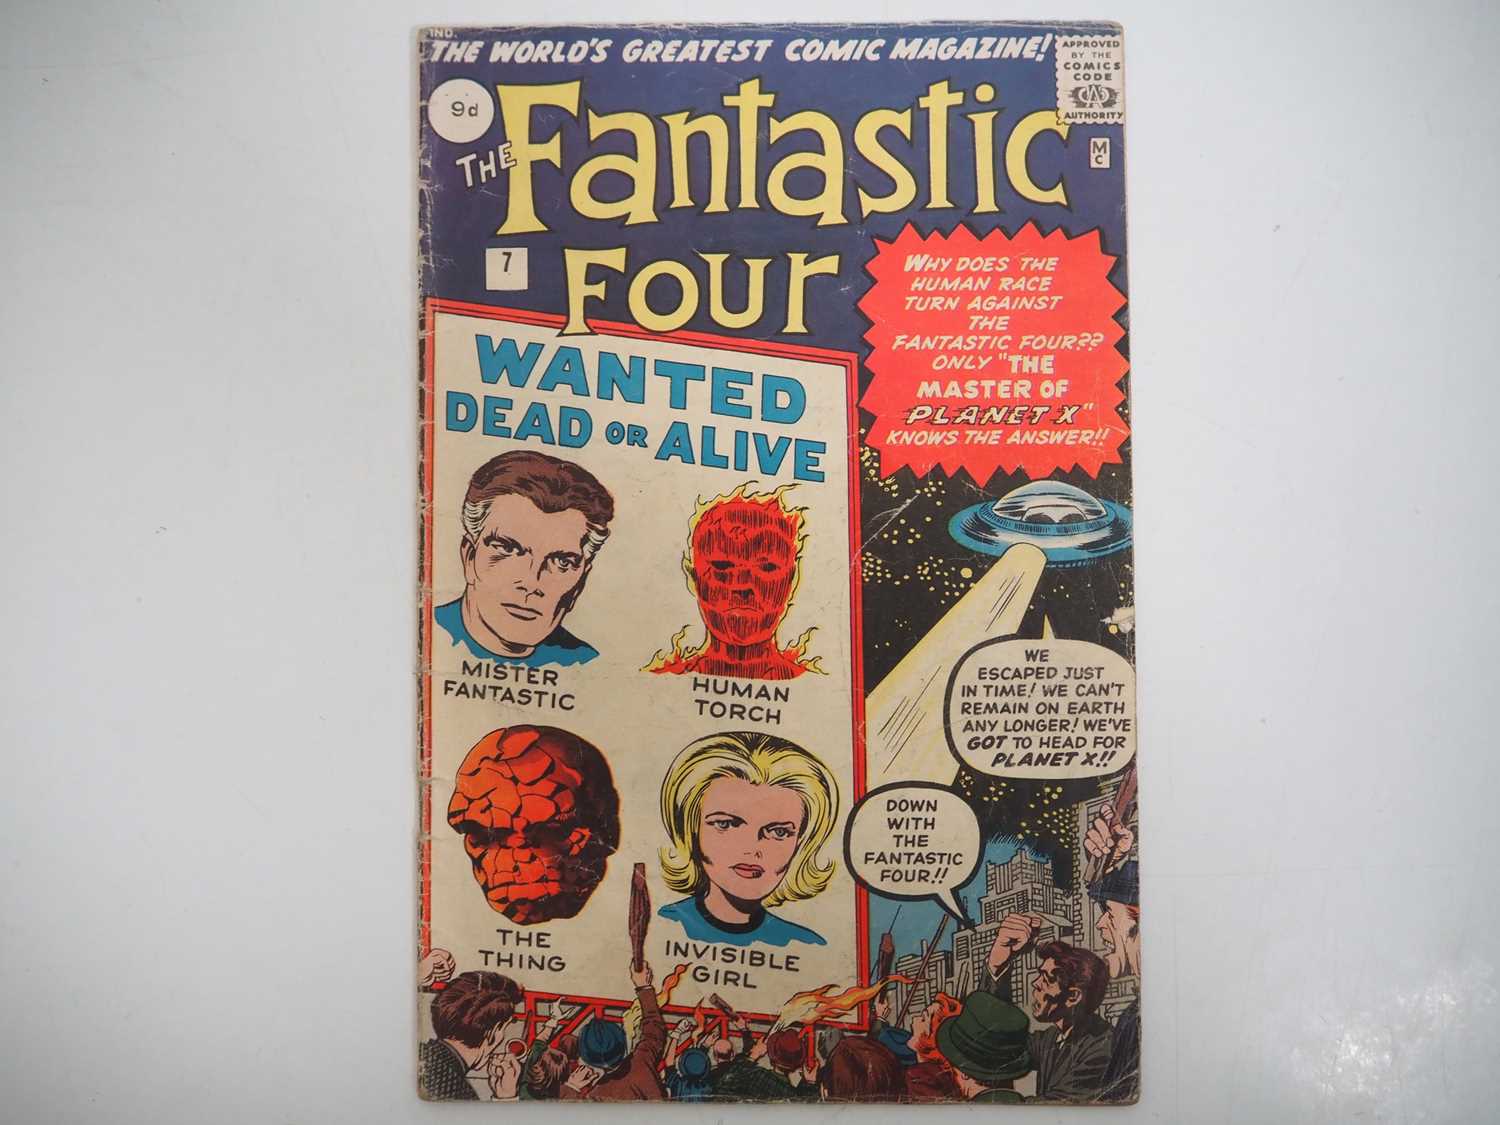 FANTASTIC FOUR #7 (1962 - MARVEL - UK Price Variant) - First appearance of Kurrgo - Jack Kirby cover